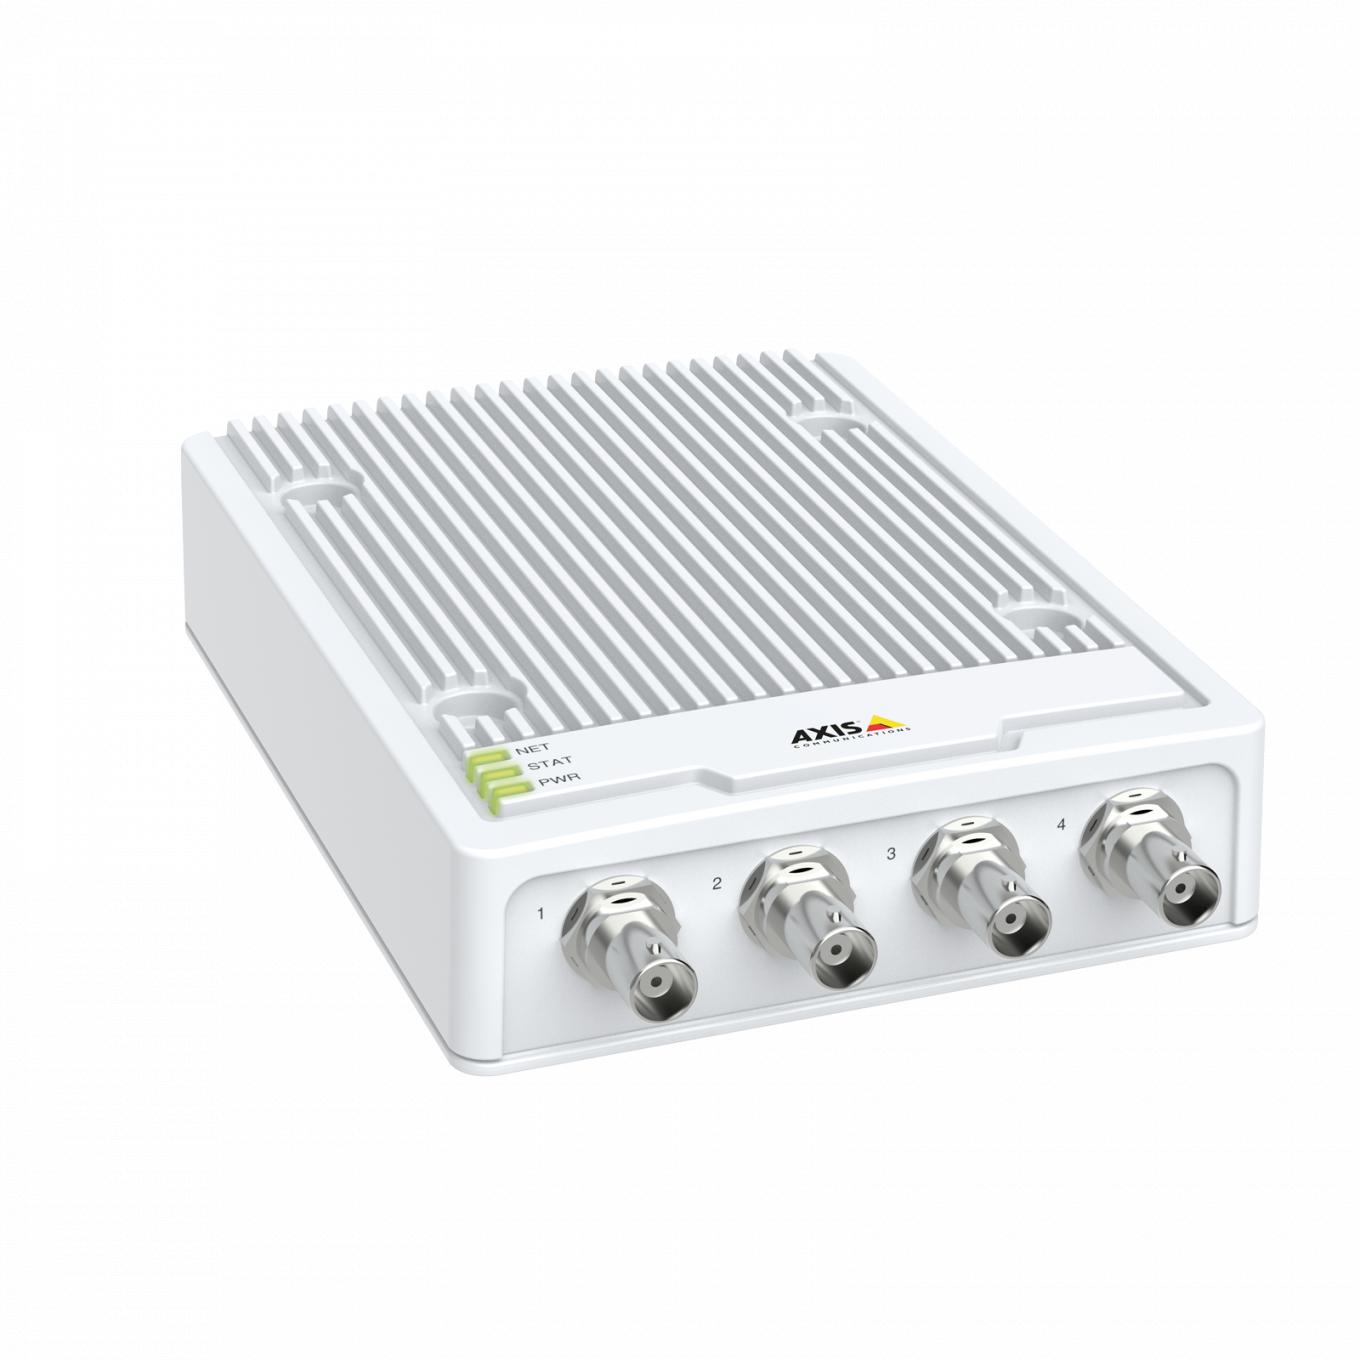 AXIS M7104 Video Encoder | Axis Communications